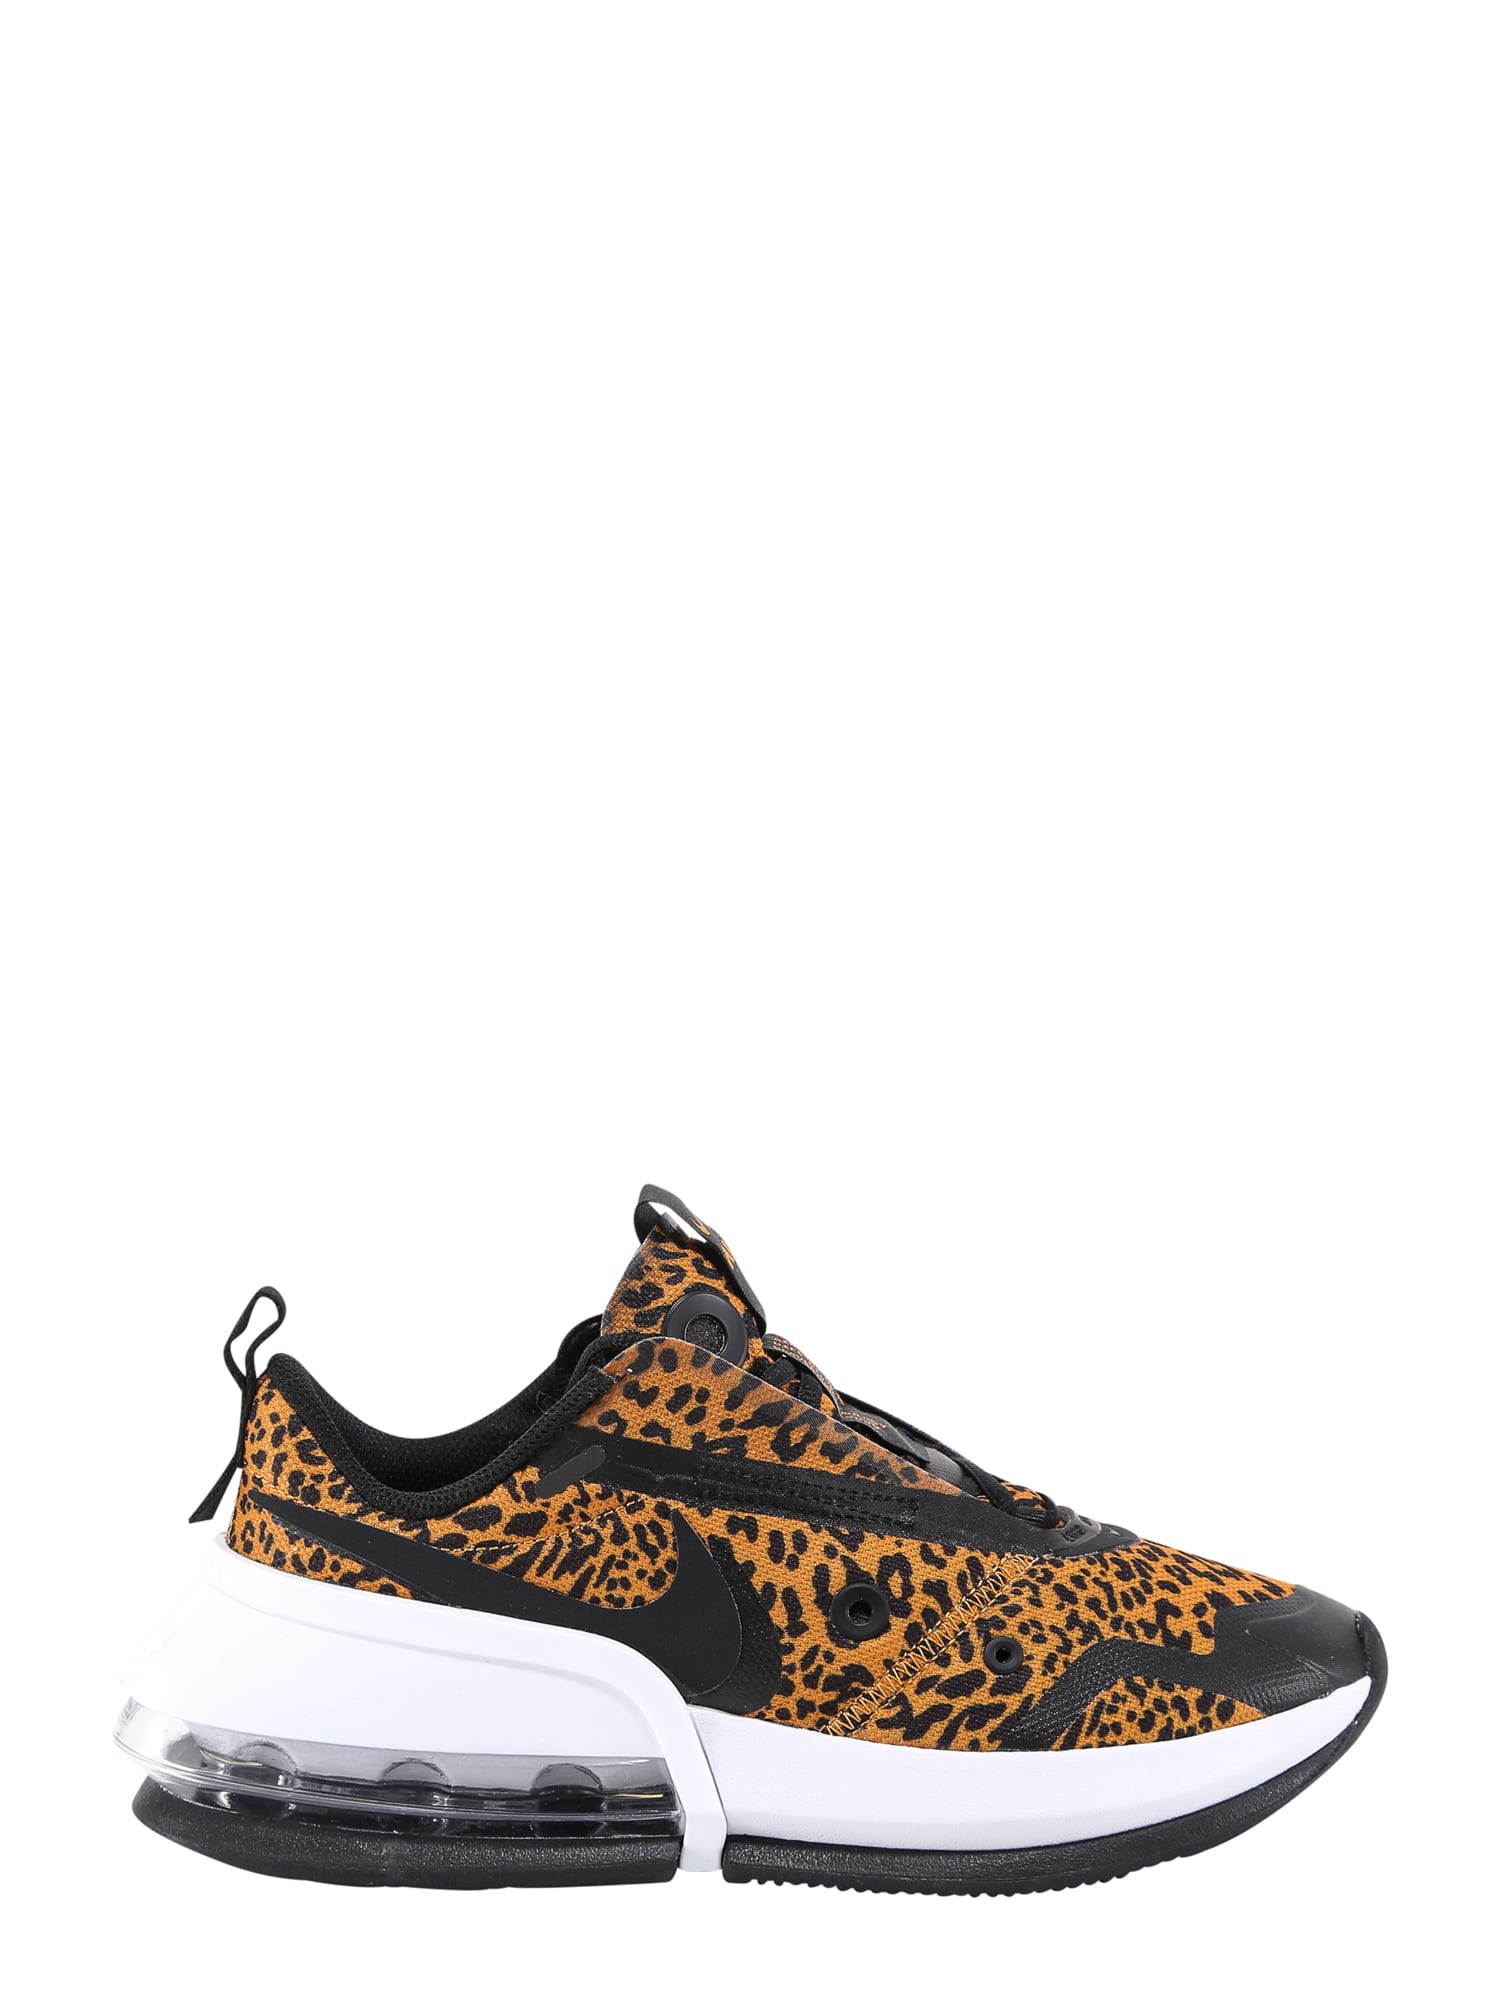 NIKE AIR MAX UP trainers,DC9206 700